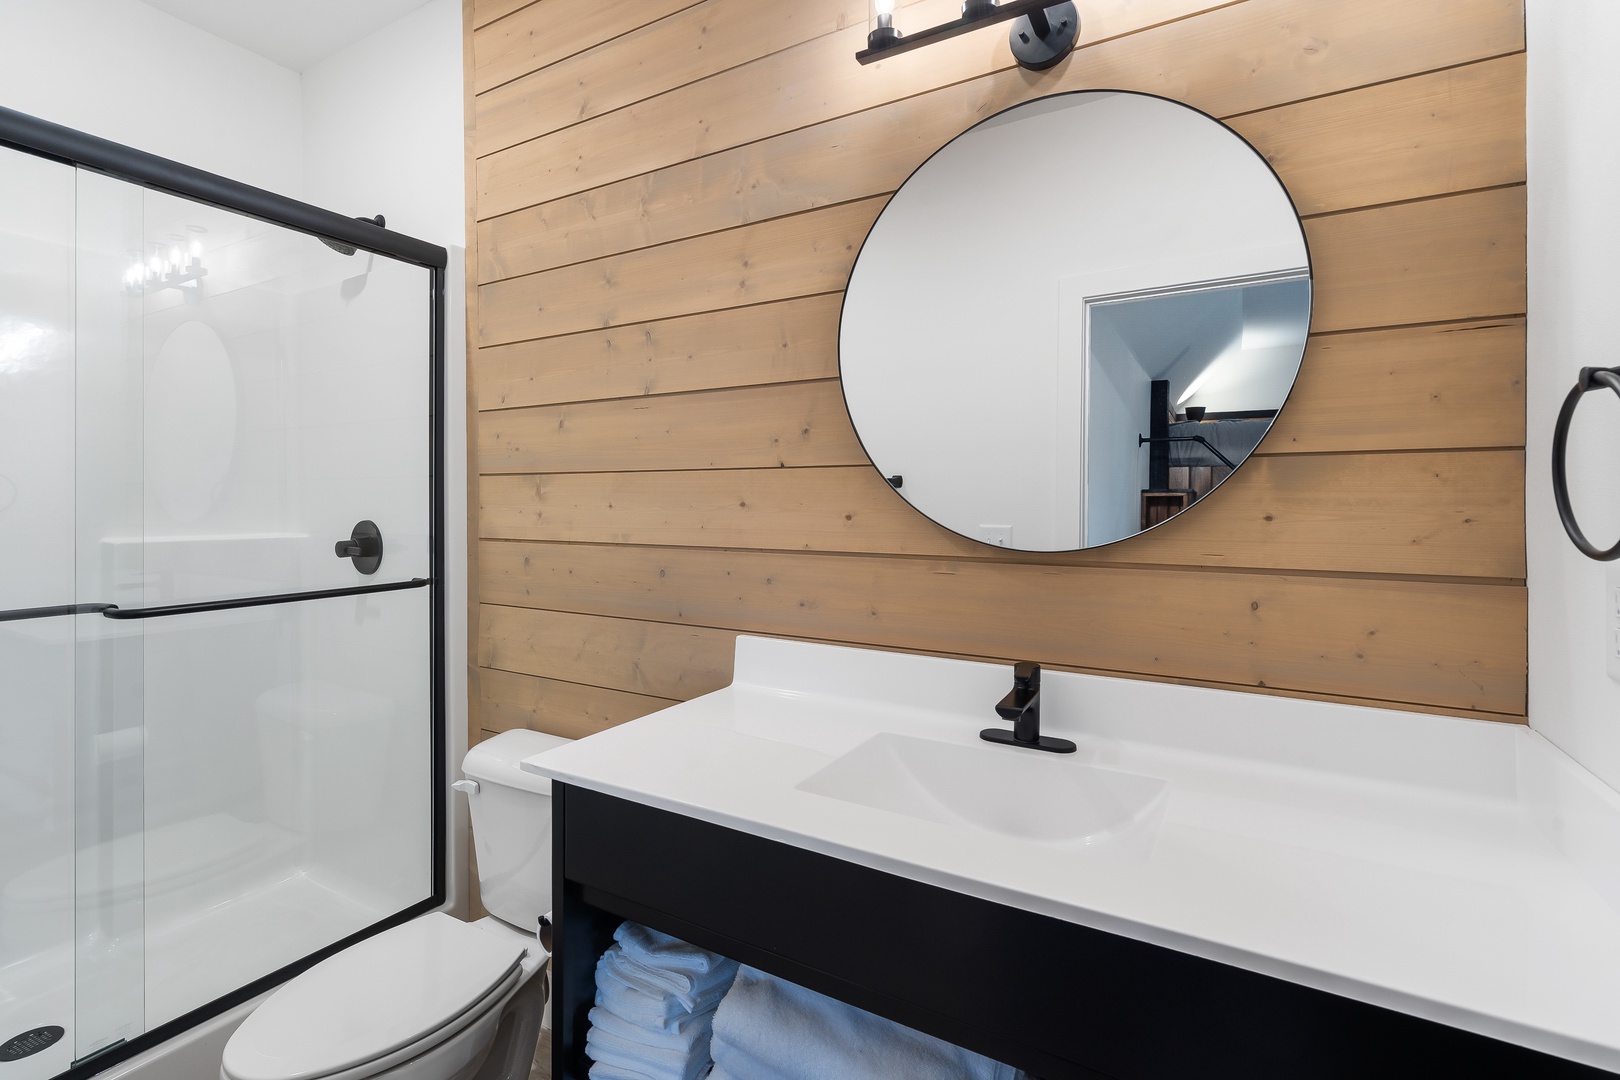 The 3rd bedroom’s ensuite bath offers a single vanity & glass shower